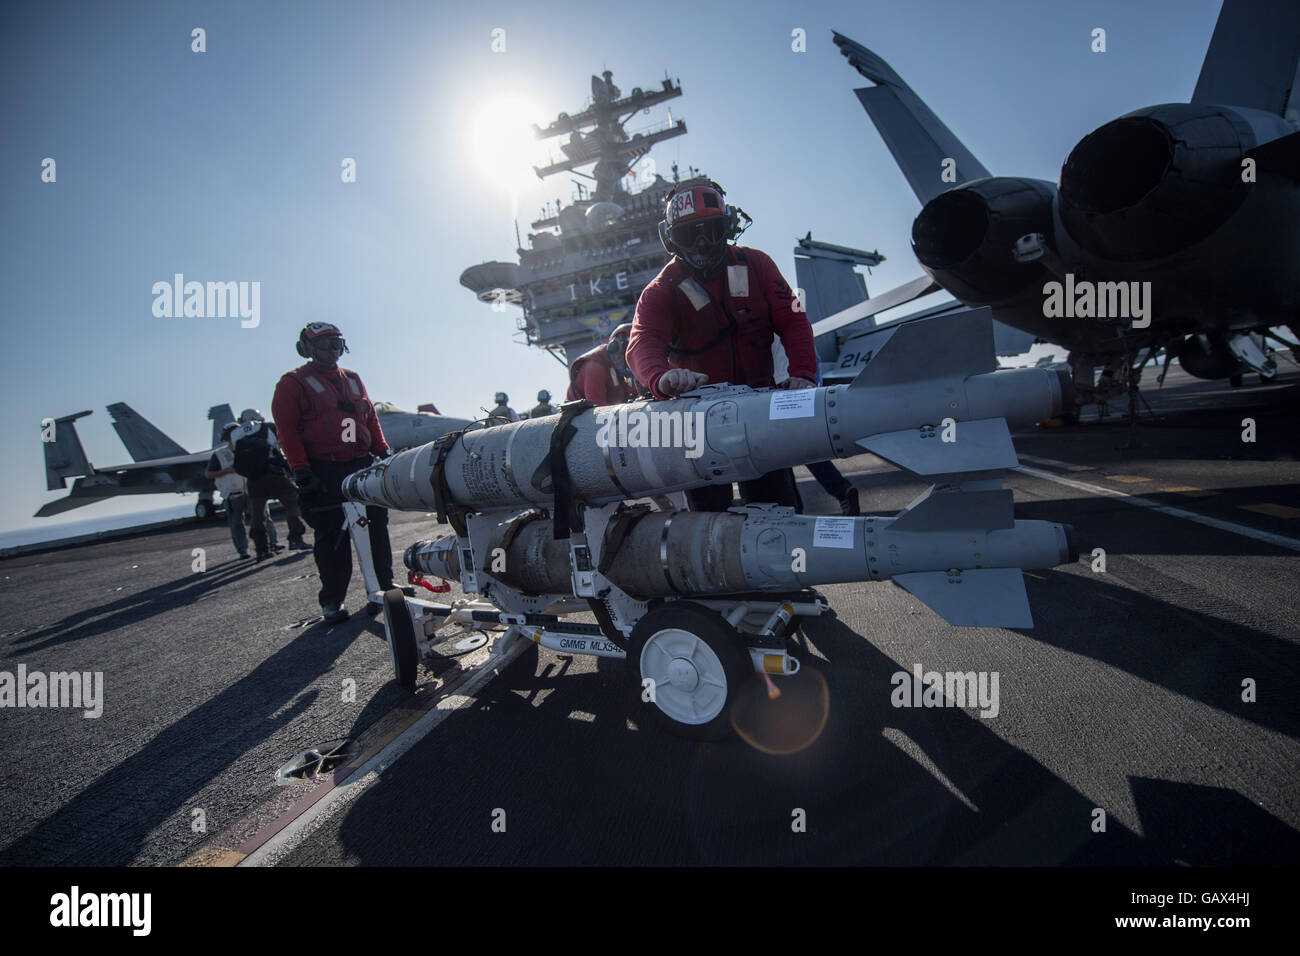 Aviation ordnancemen move missiles on the deck of the aircraft carrier USS Dwight D. Eisenhower in the eastern Mediterranean Sea, 01 July 2016. The images were taken upon invitation by the U.S. Navy. Photo: Marijan Murat/dpa Stock Photo